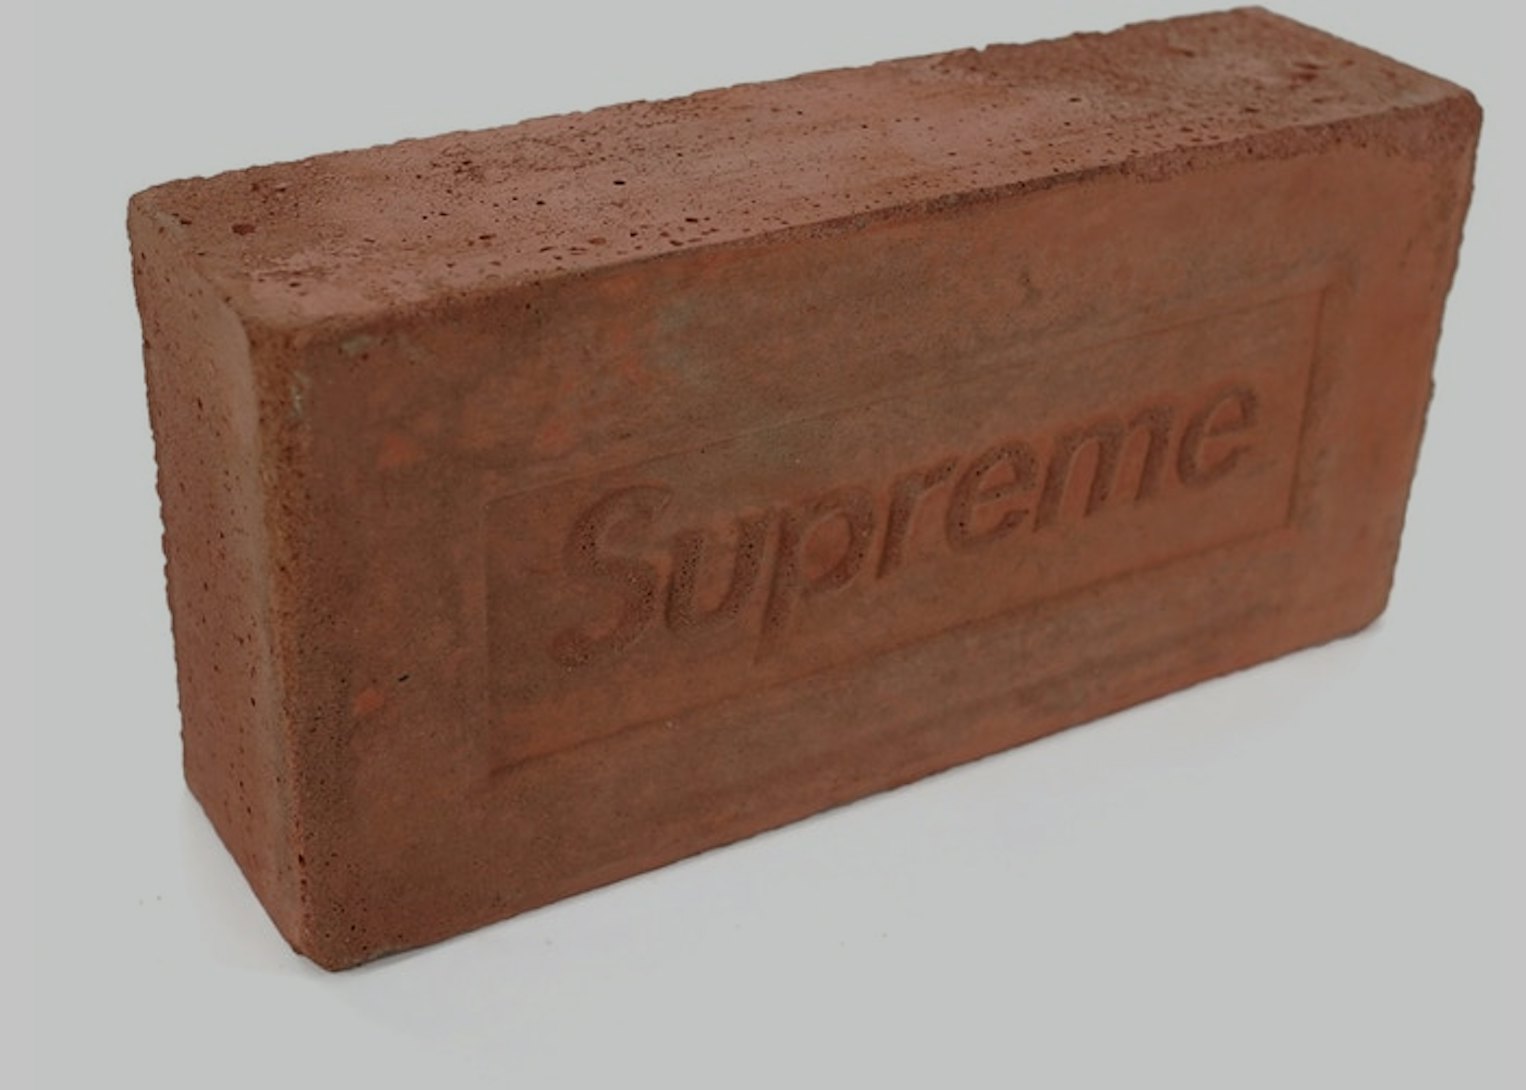 MAKING AND SELLING THE $70,000 NEW SUPREME LOUIS VUITTON BRICK! (NO  CLICKBAIT!) 